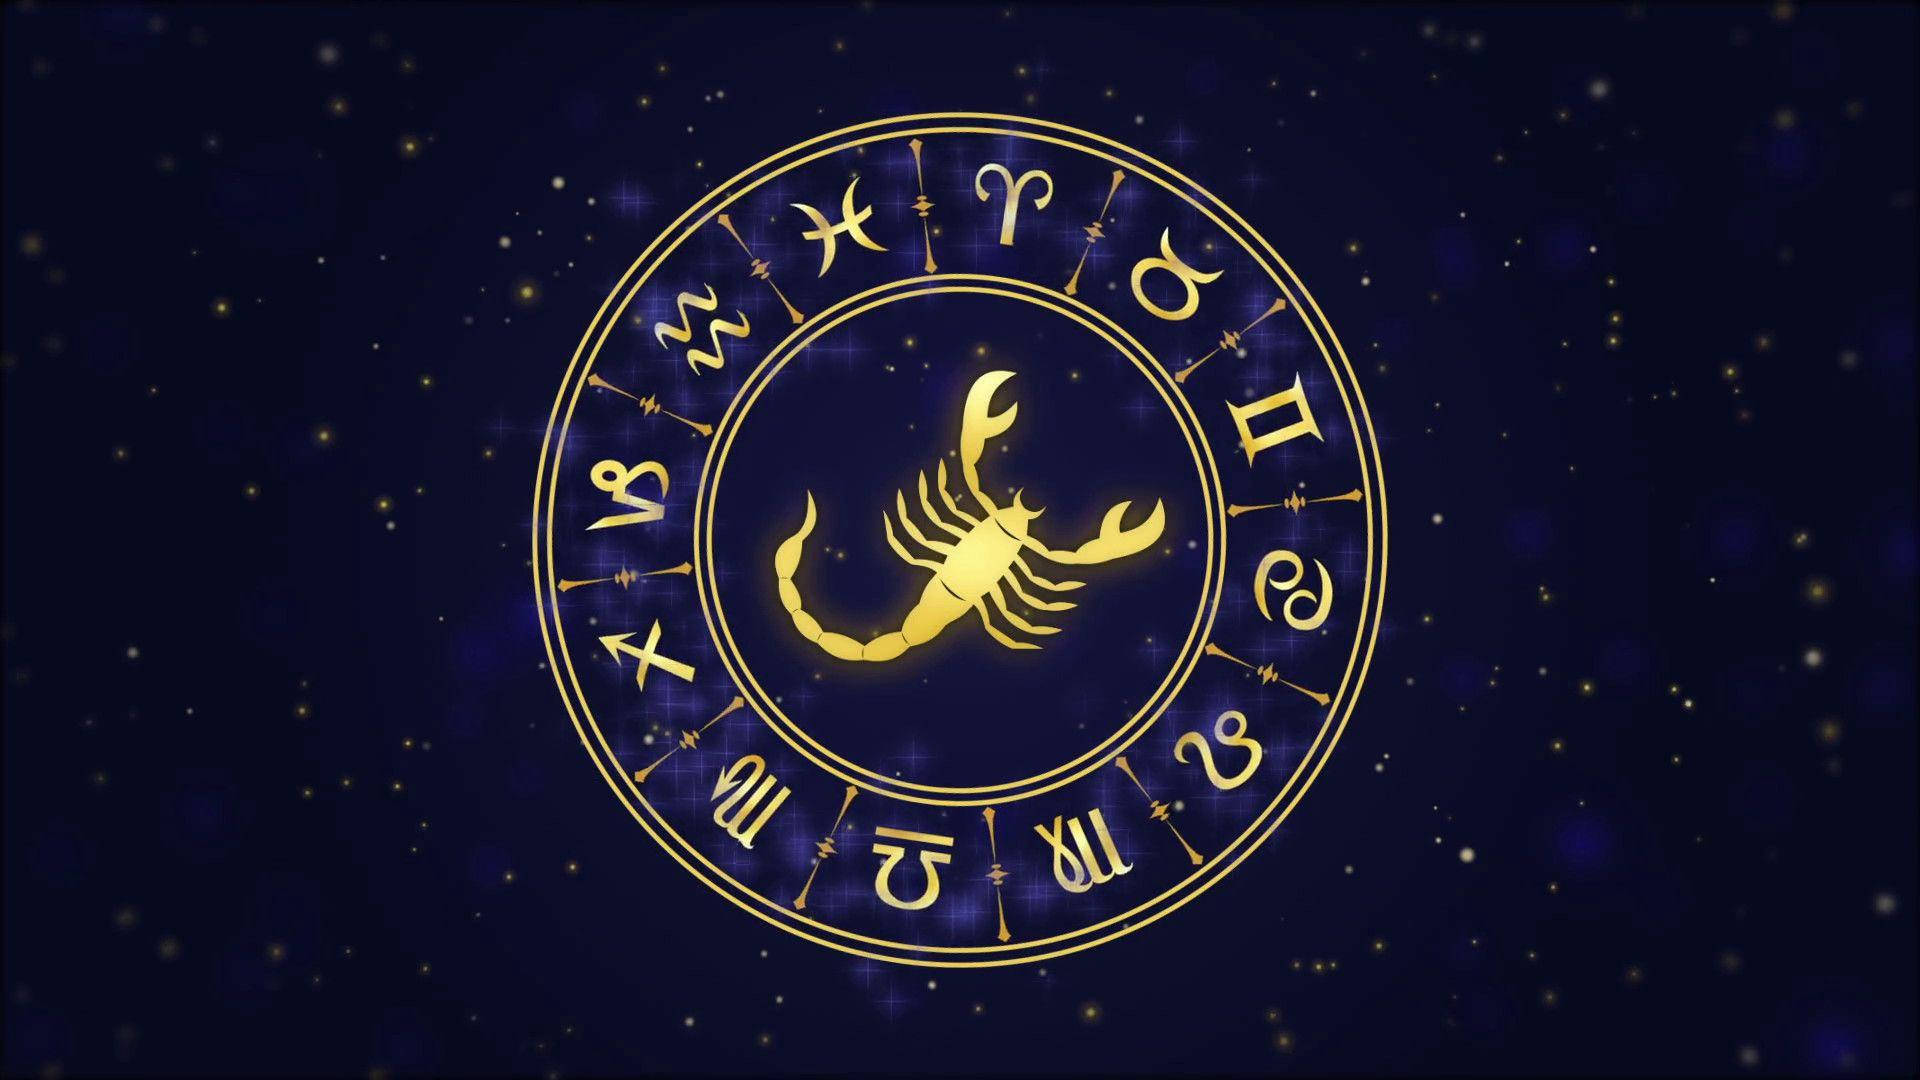 Scorpio And Astrological Signs Background